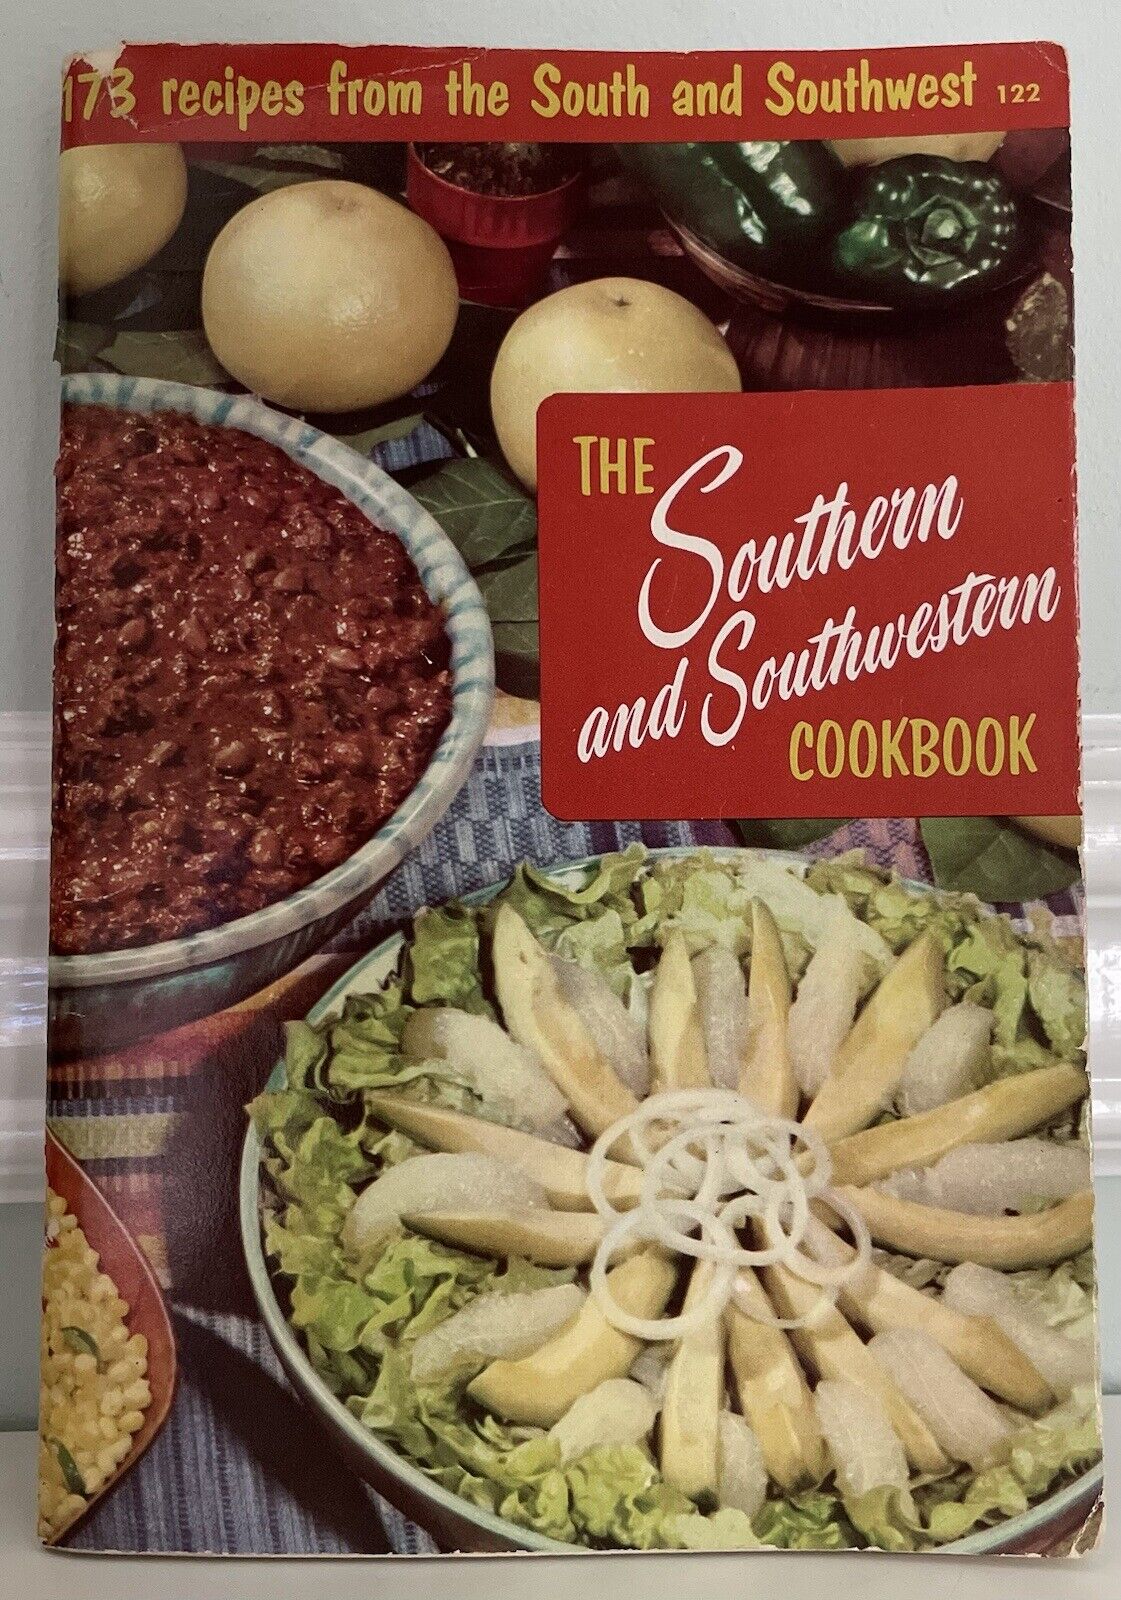 The Southern and  Southwestern Cookbook - Culinary Arts Institute - #122 - 1956